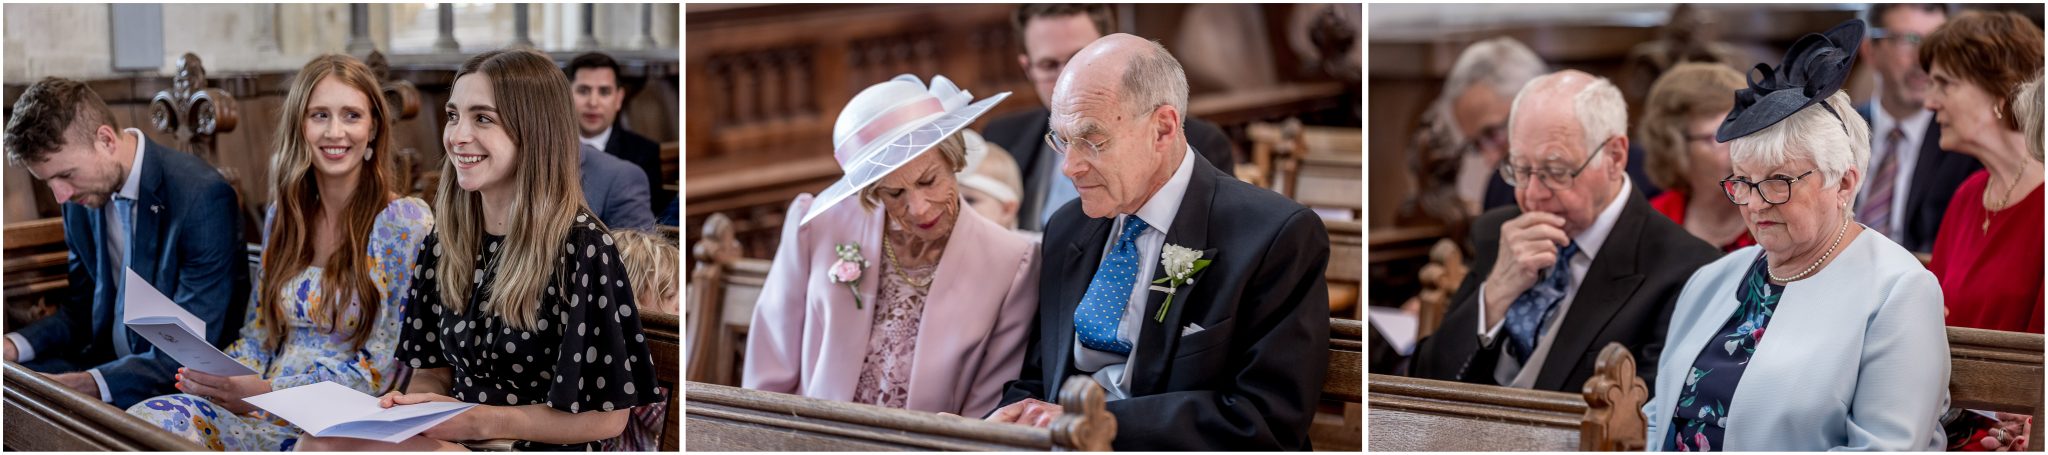 Candid photographs of guests having taken their seat in the church before the wedding